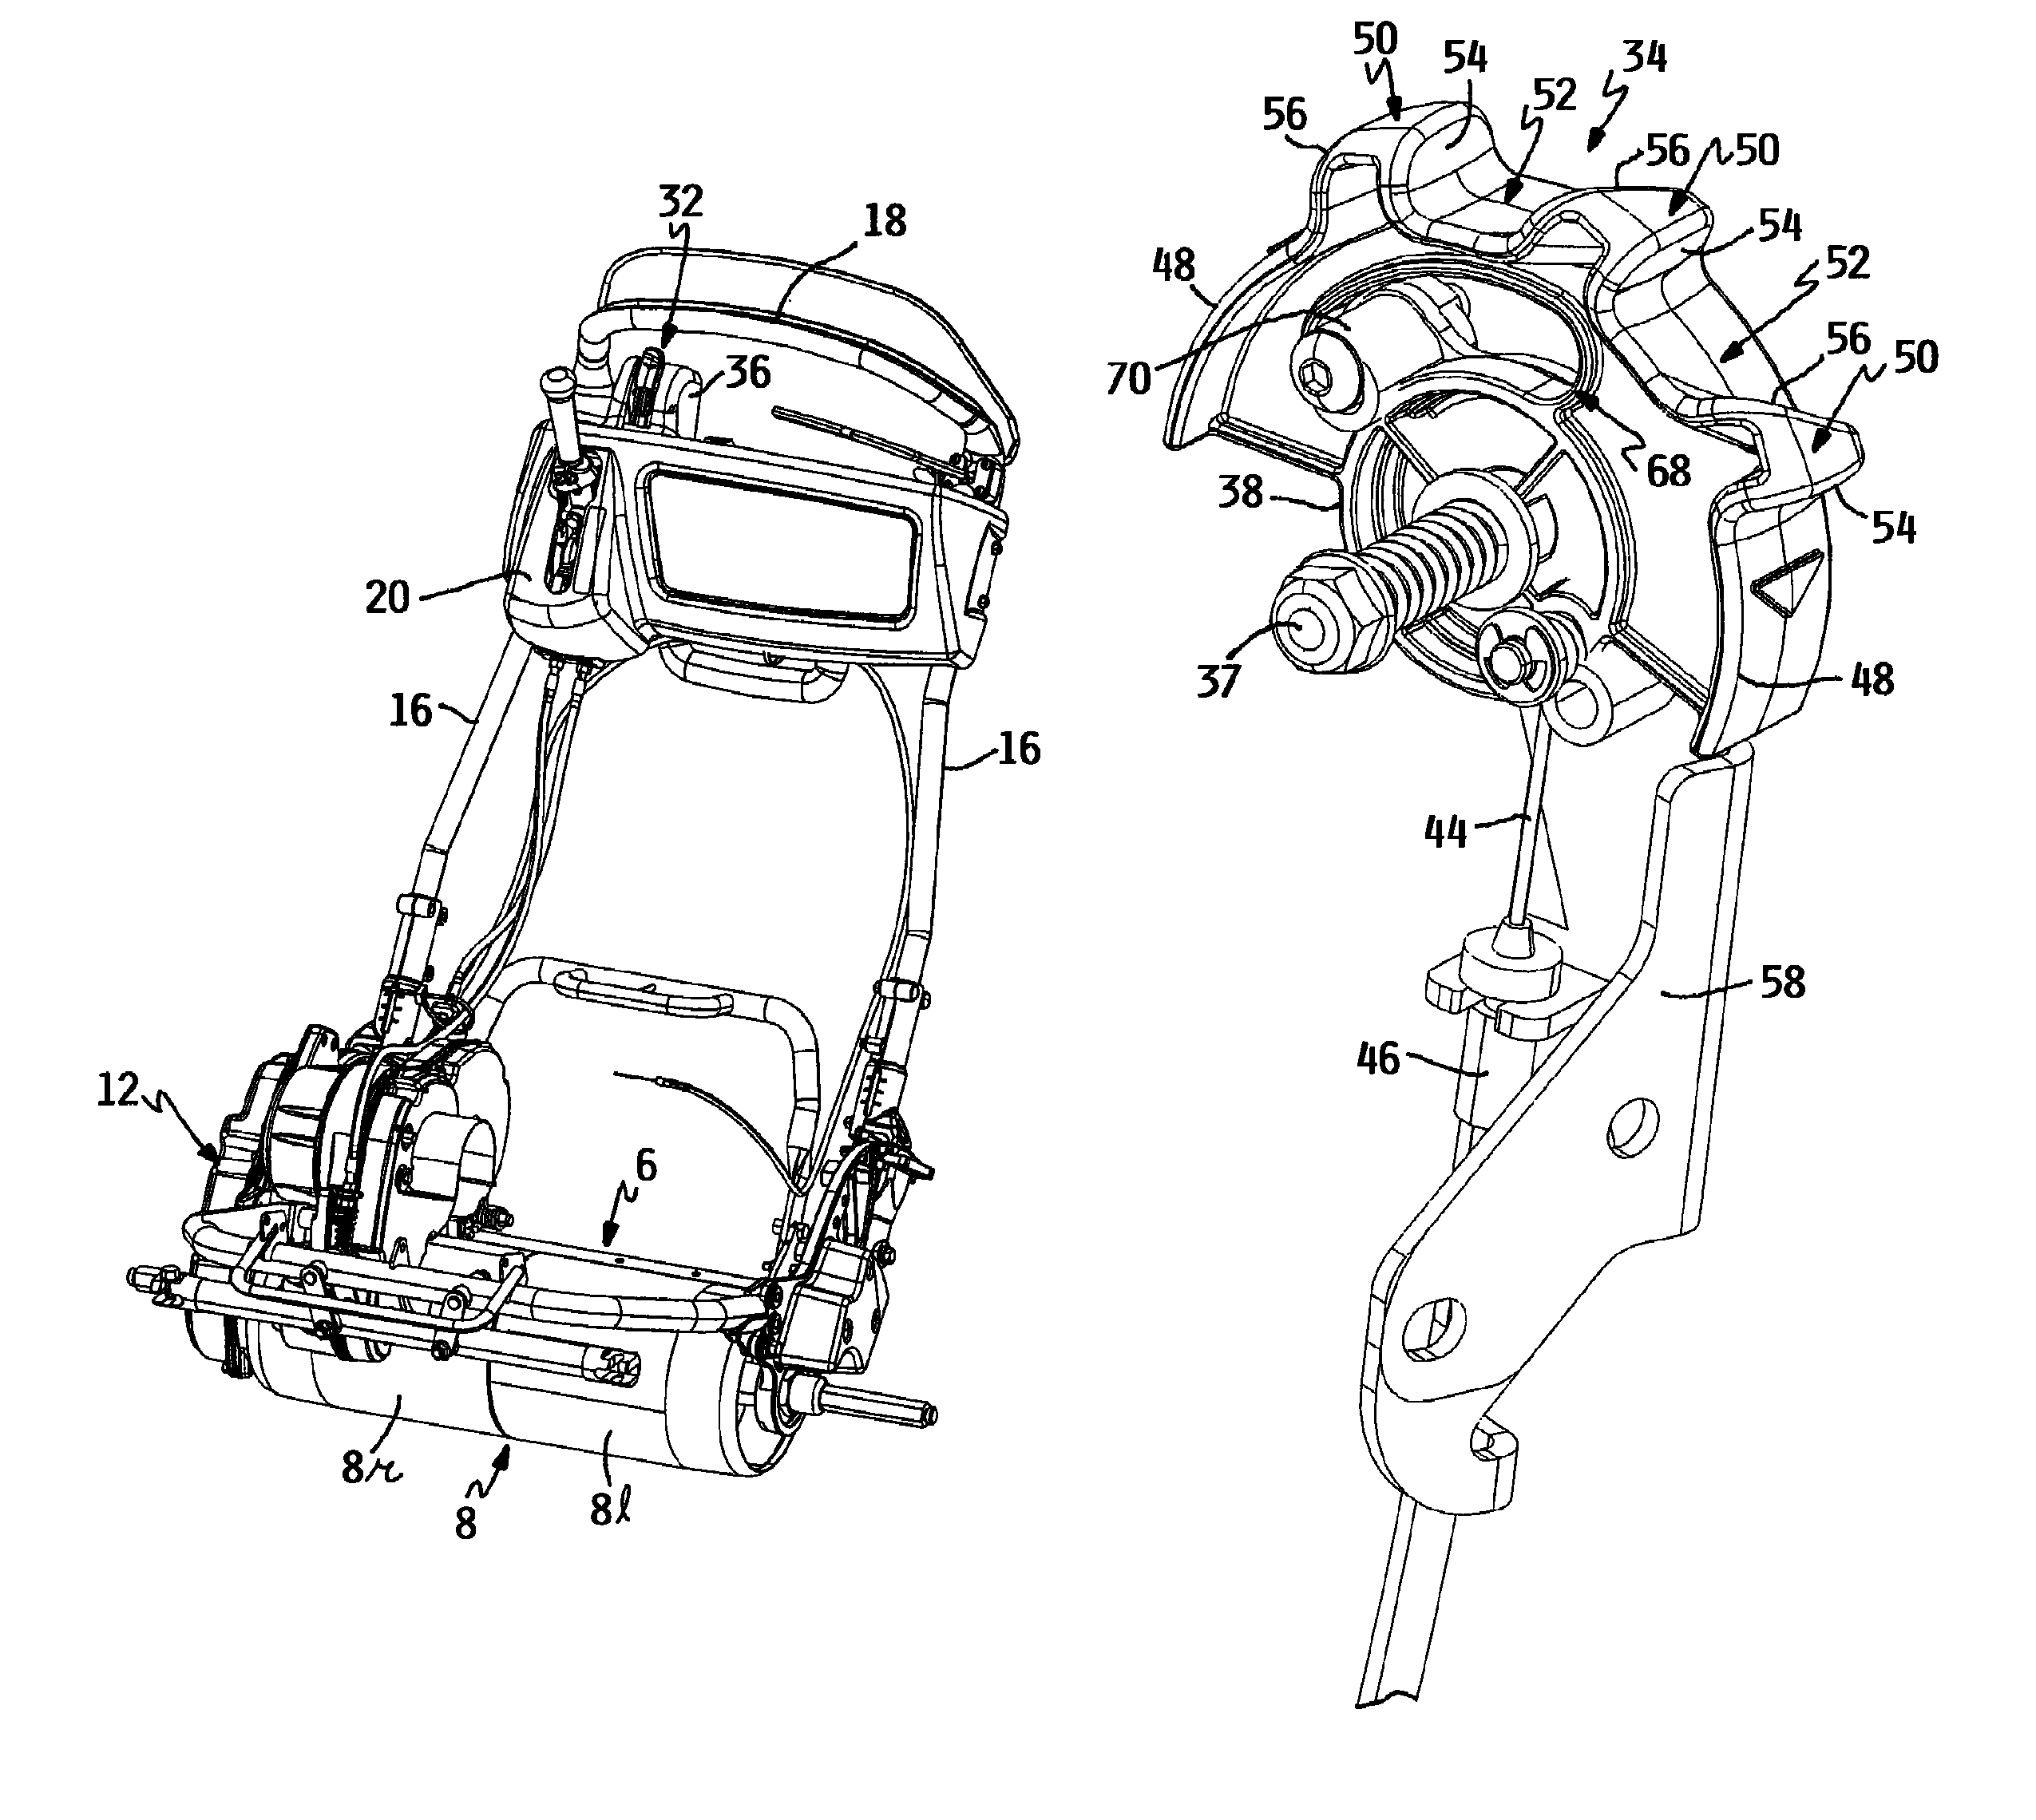 Mower with thumb wheel throttle control